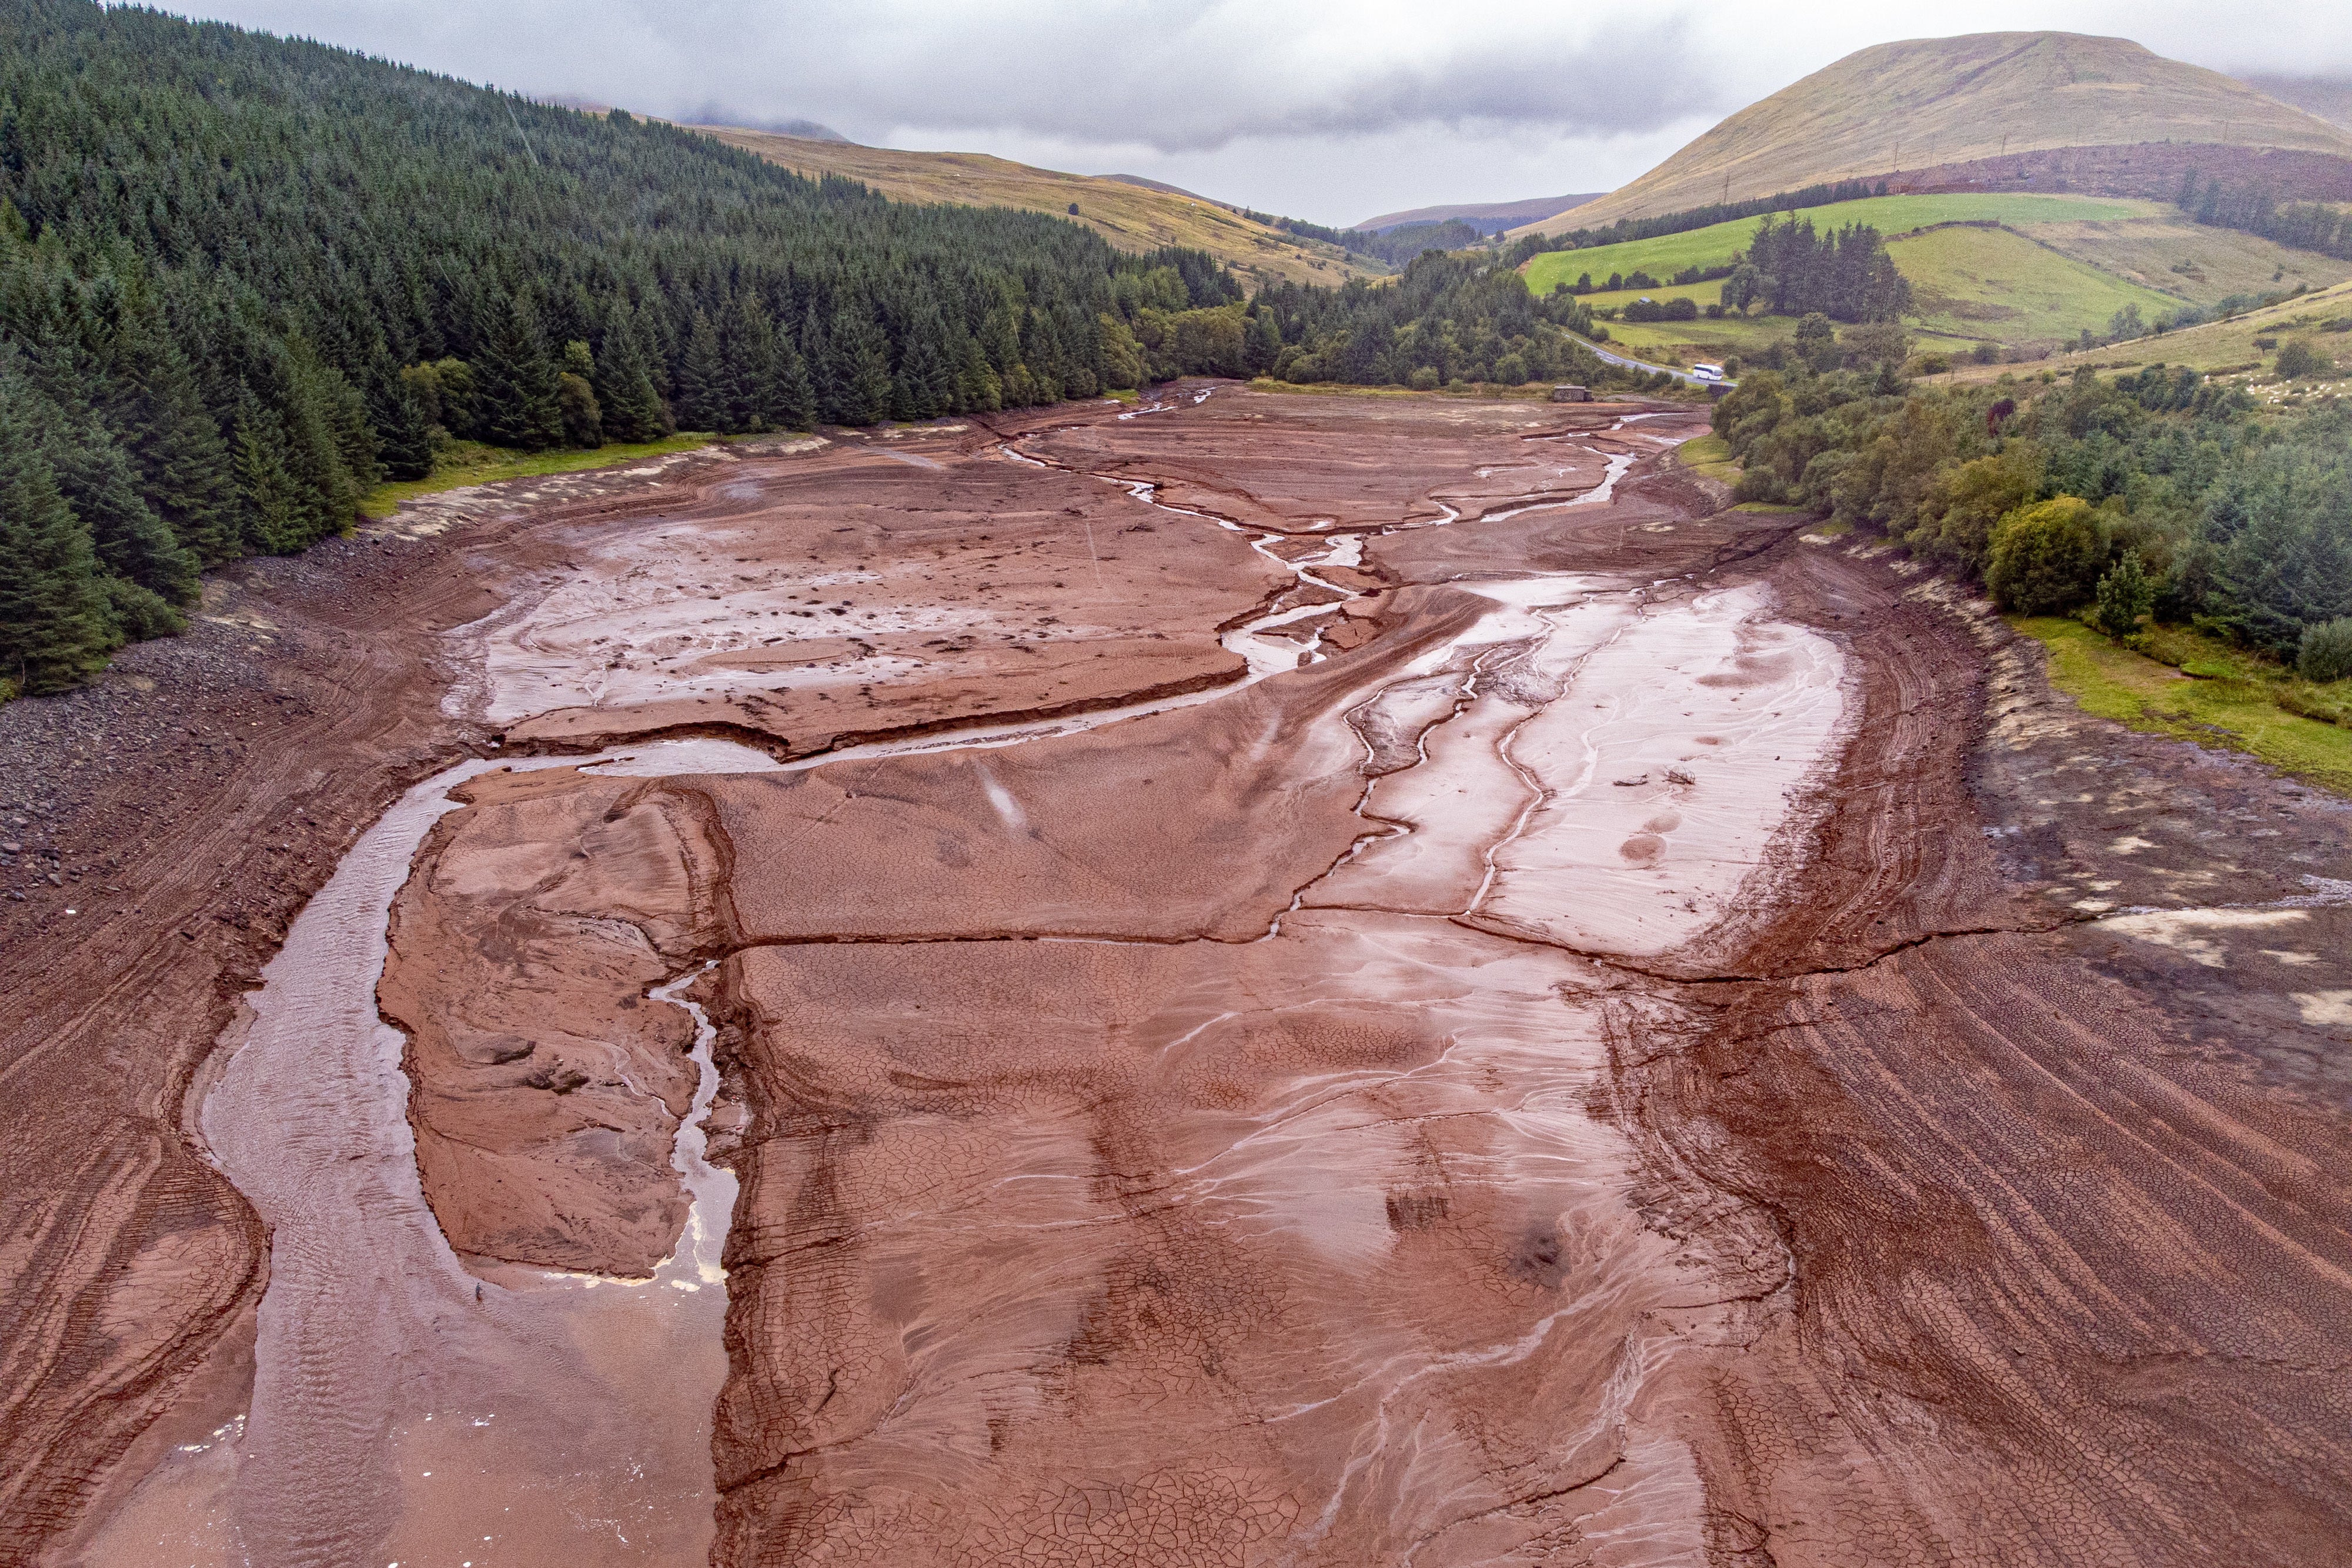 General views of Cantref Reservoir in Brecon Beacons National Park, Wales, where water levels are low.